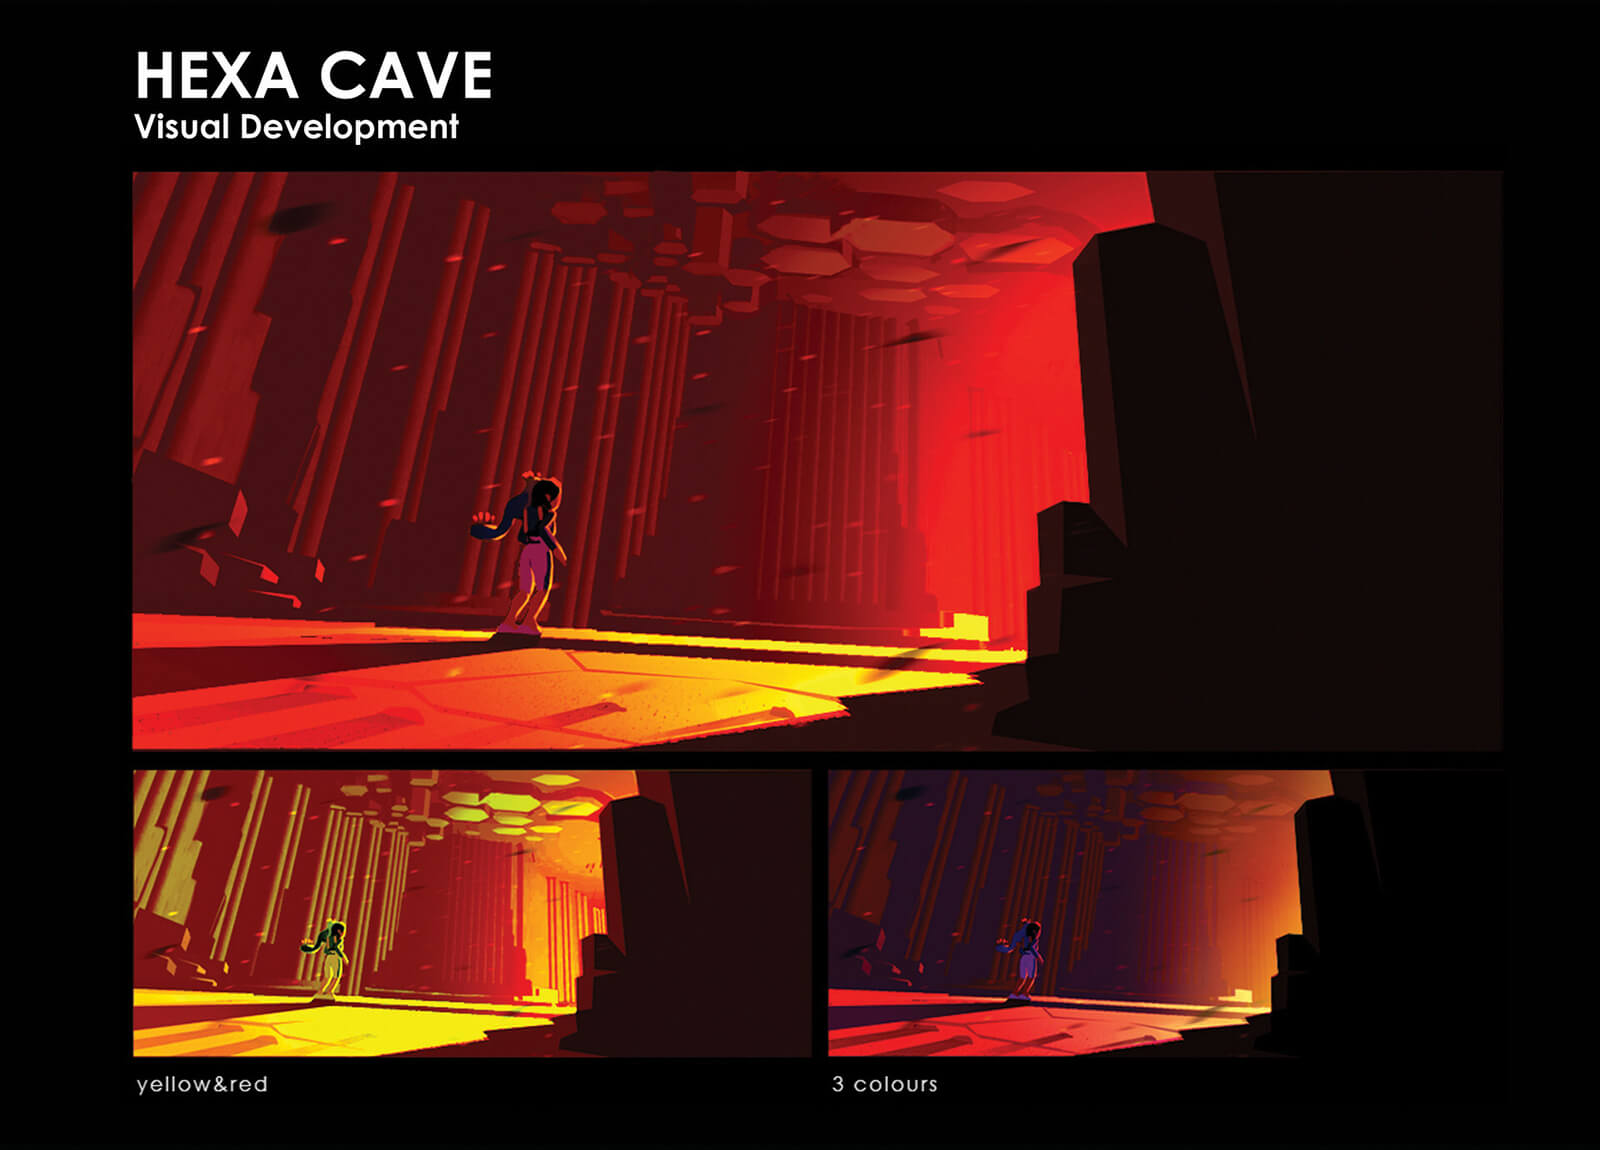 Visual development sketches of astronaut character inside a vast cave with hexagonal rocks and unknown light source.